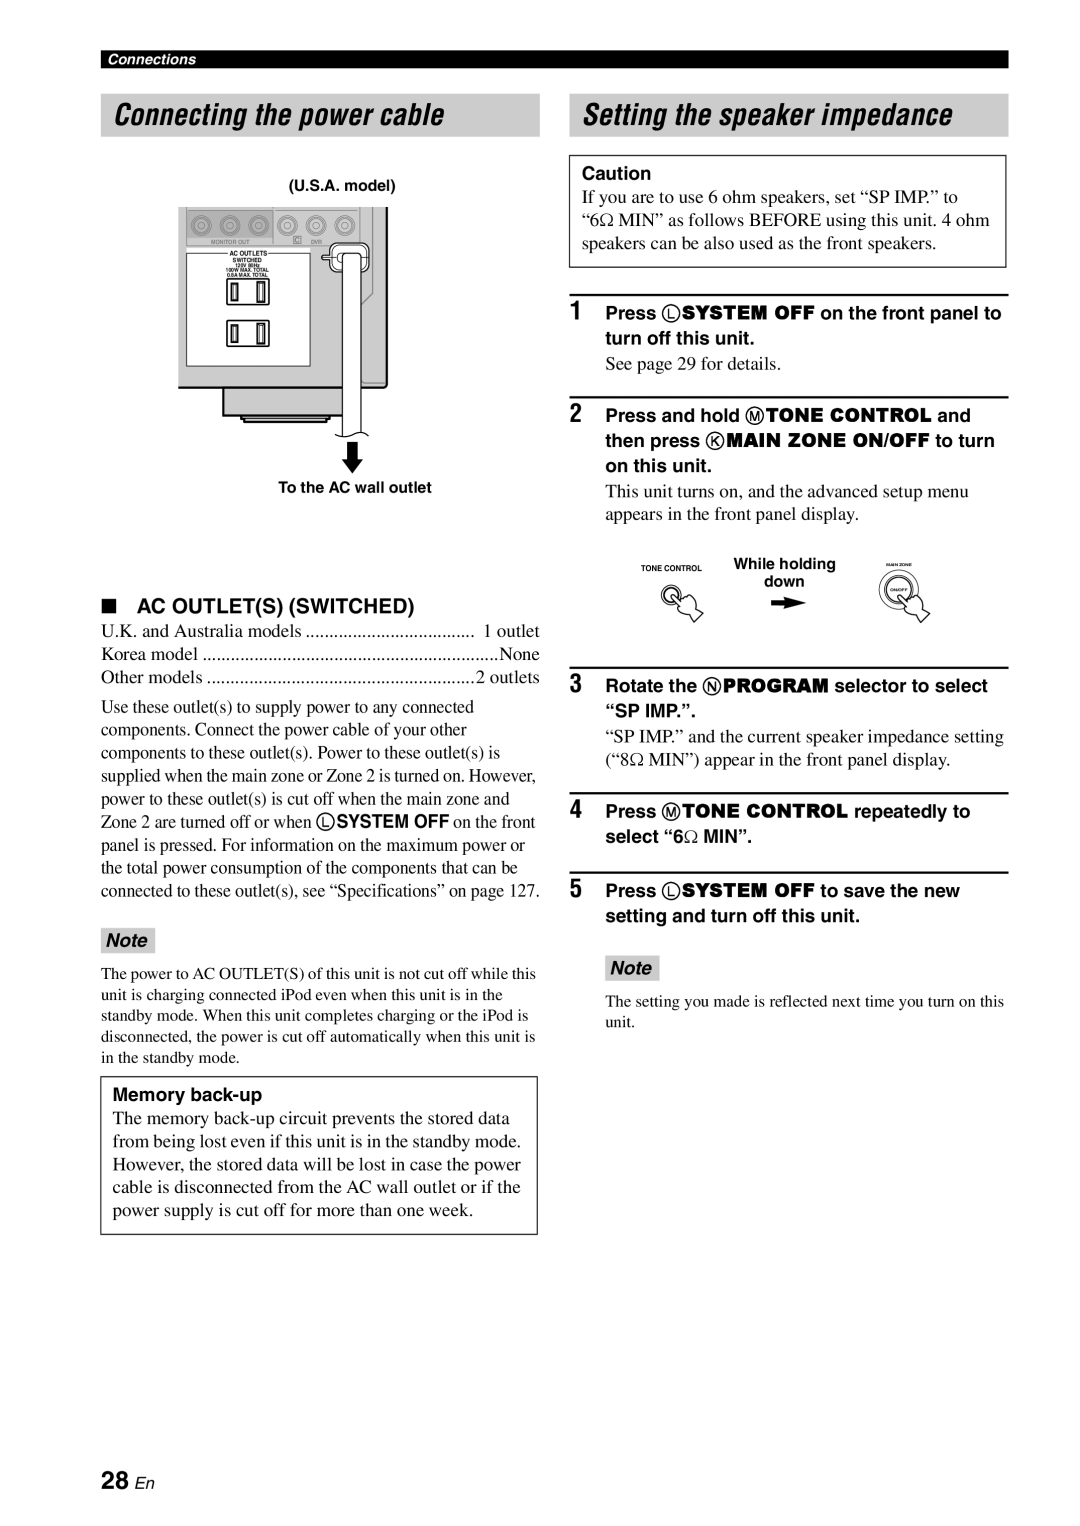 Yamaha RX-V863 owner manual 28 En, Ac Outlets Switched, Connecting the power cable, Setting the speaker impedance 